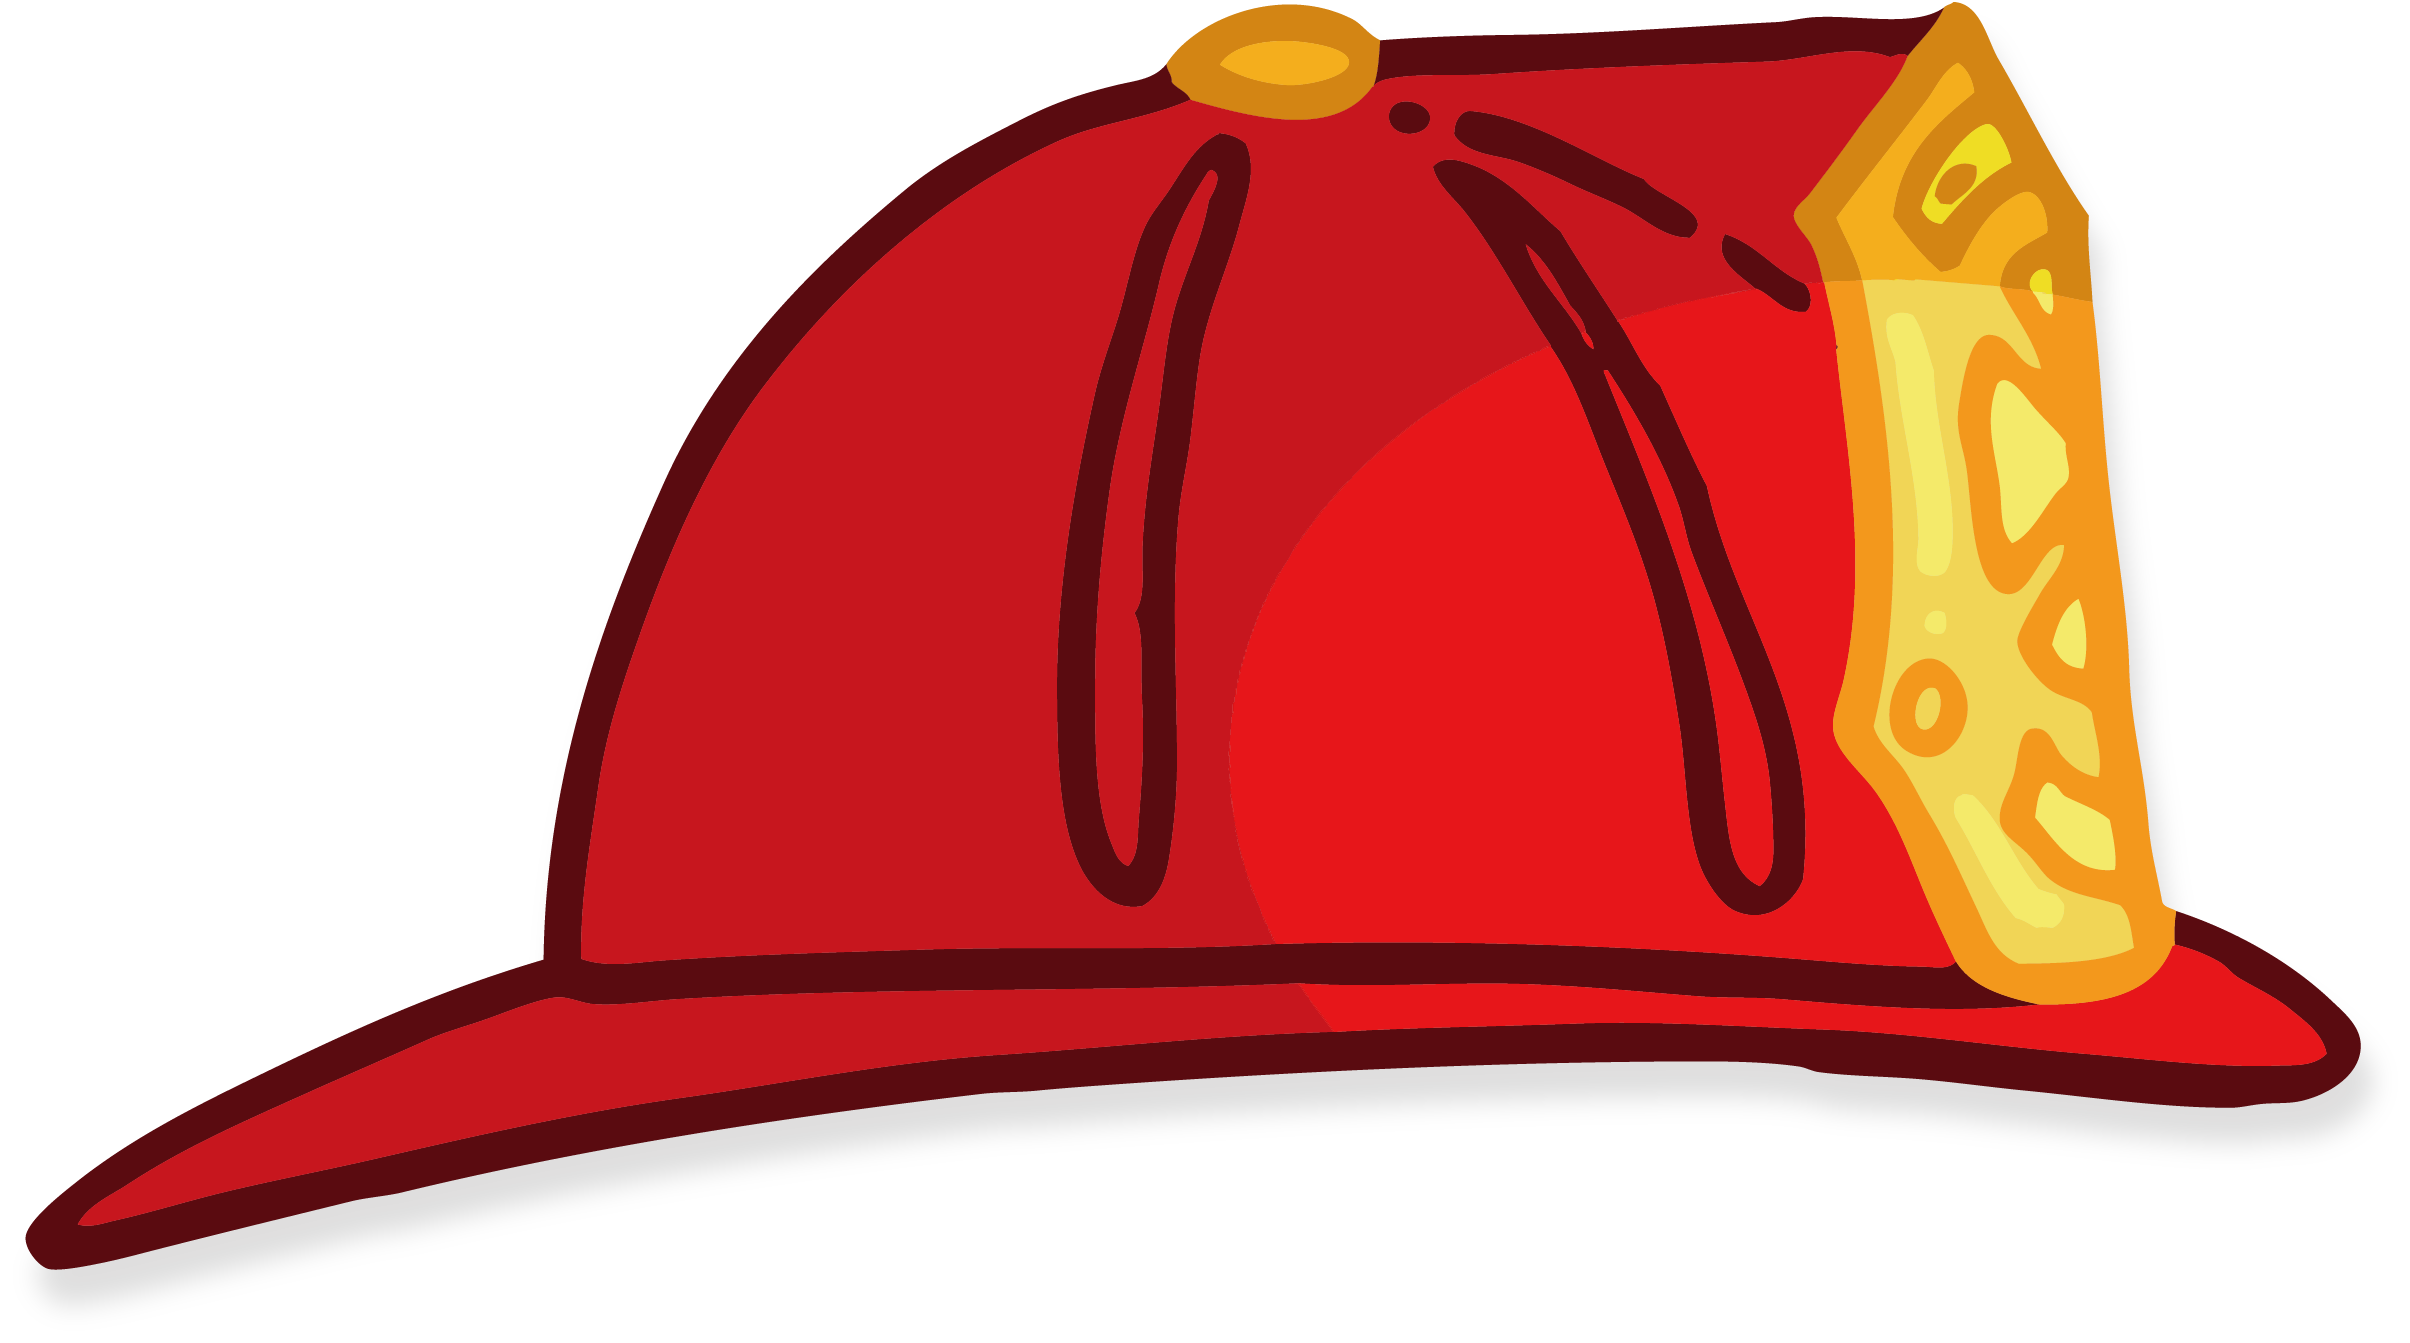 Fireman Hat Silhouette #1453873 (License: Personal Use) .